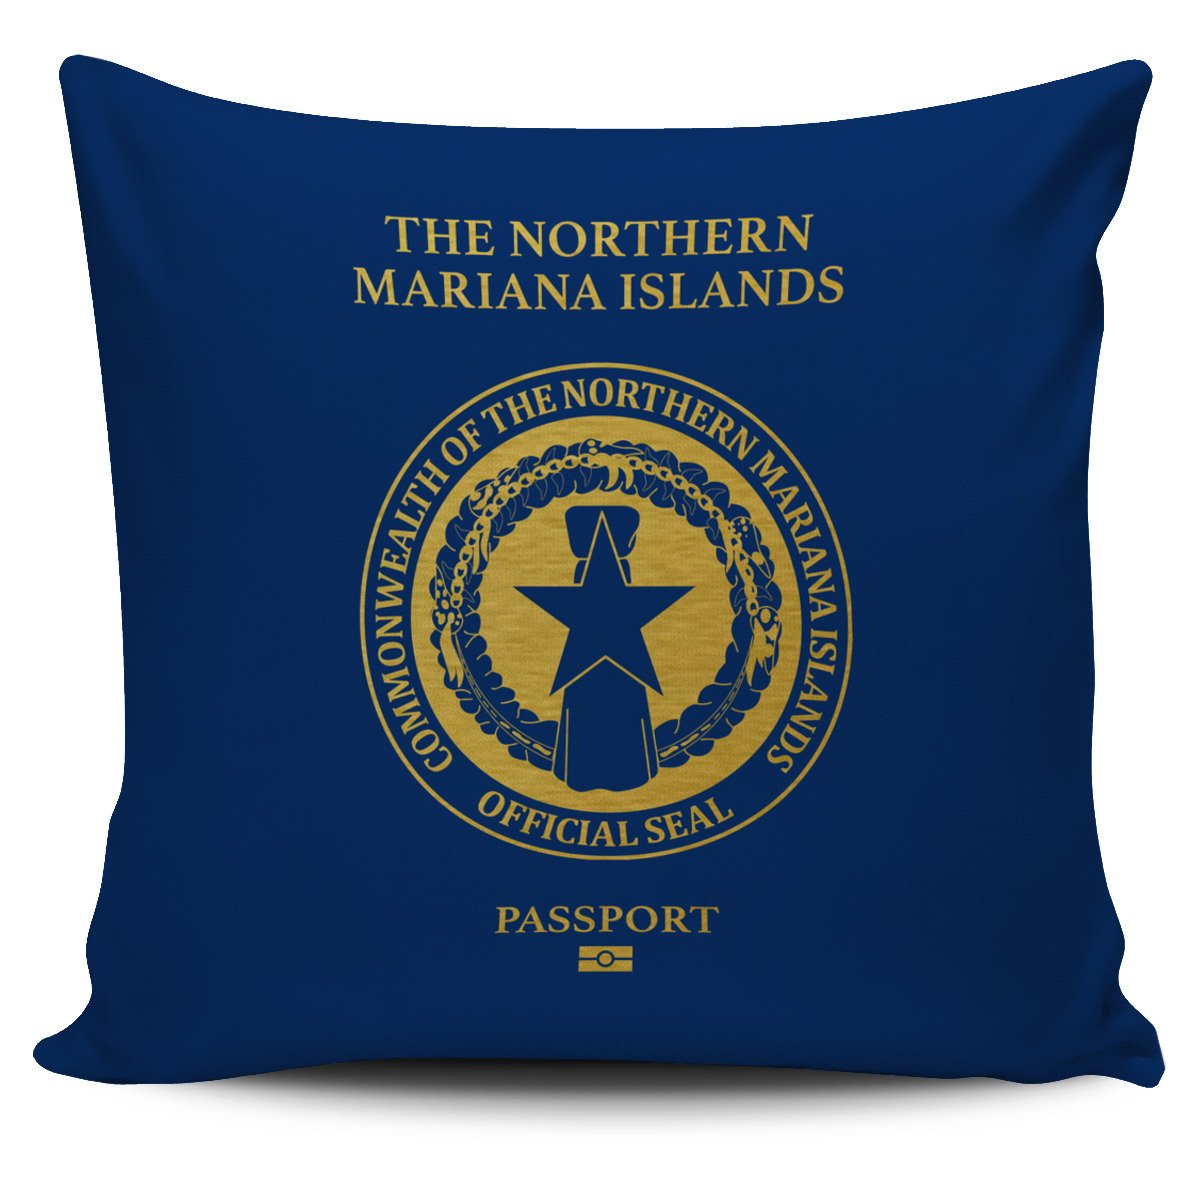 The Northern Mariana Islands Pillow Cover - Passport Version The Northern Mariana Islands One Size Blue - Polynesian Pride